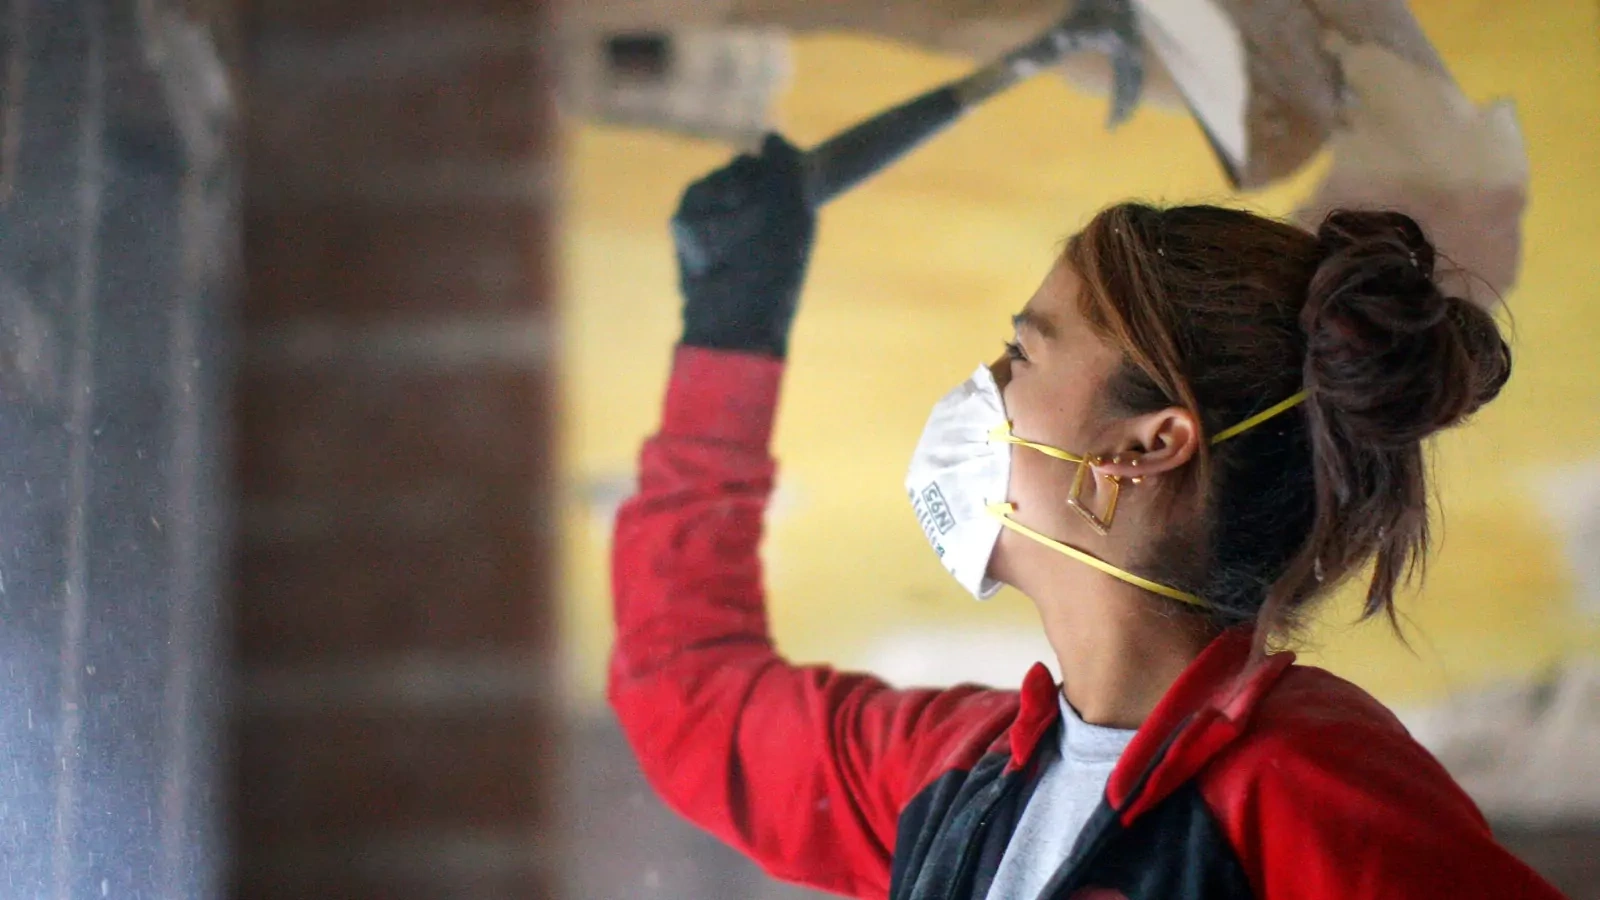 An AmeriCorps worker helps gut a house being renovated for affordable housing.